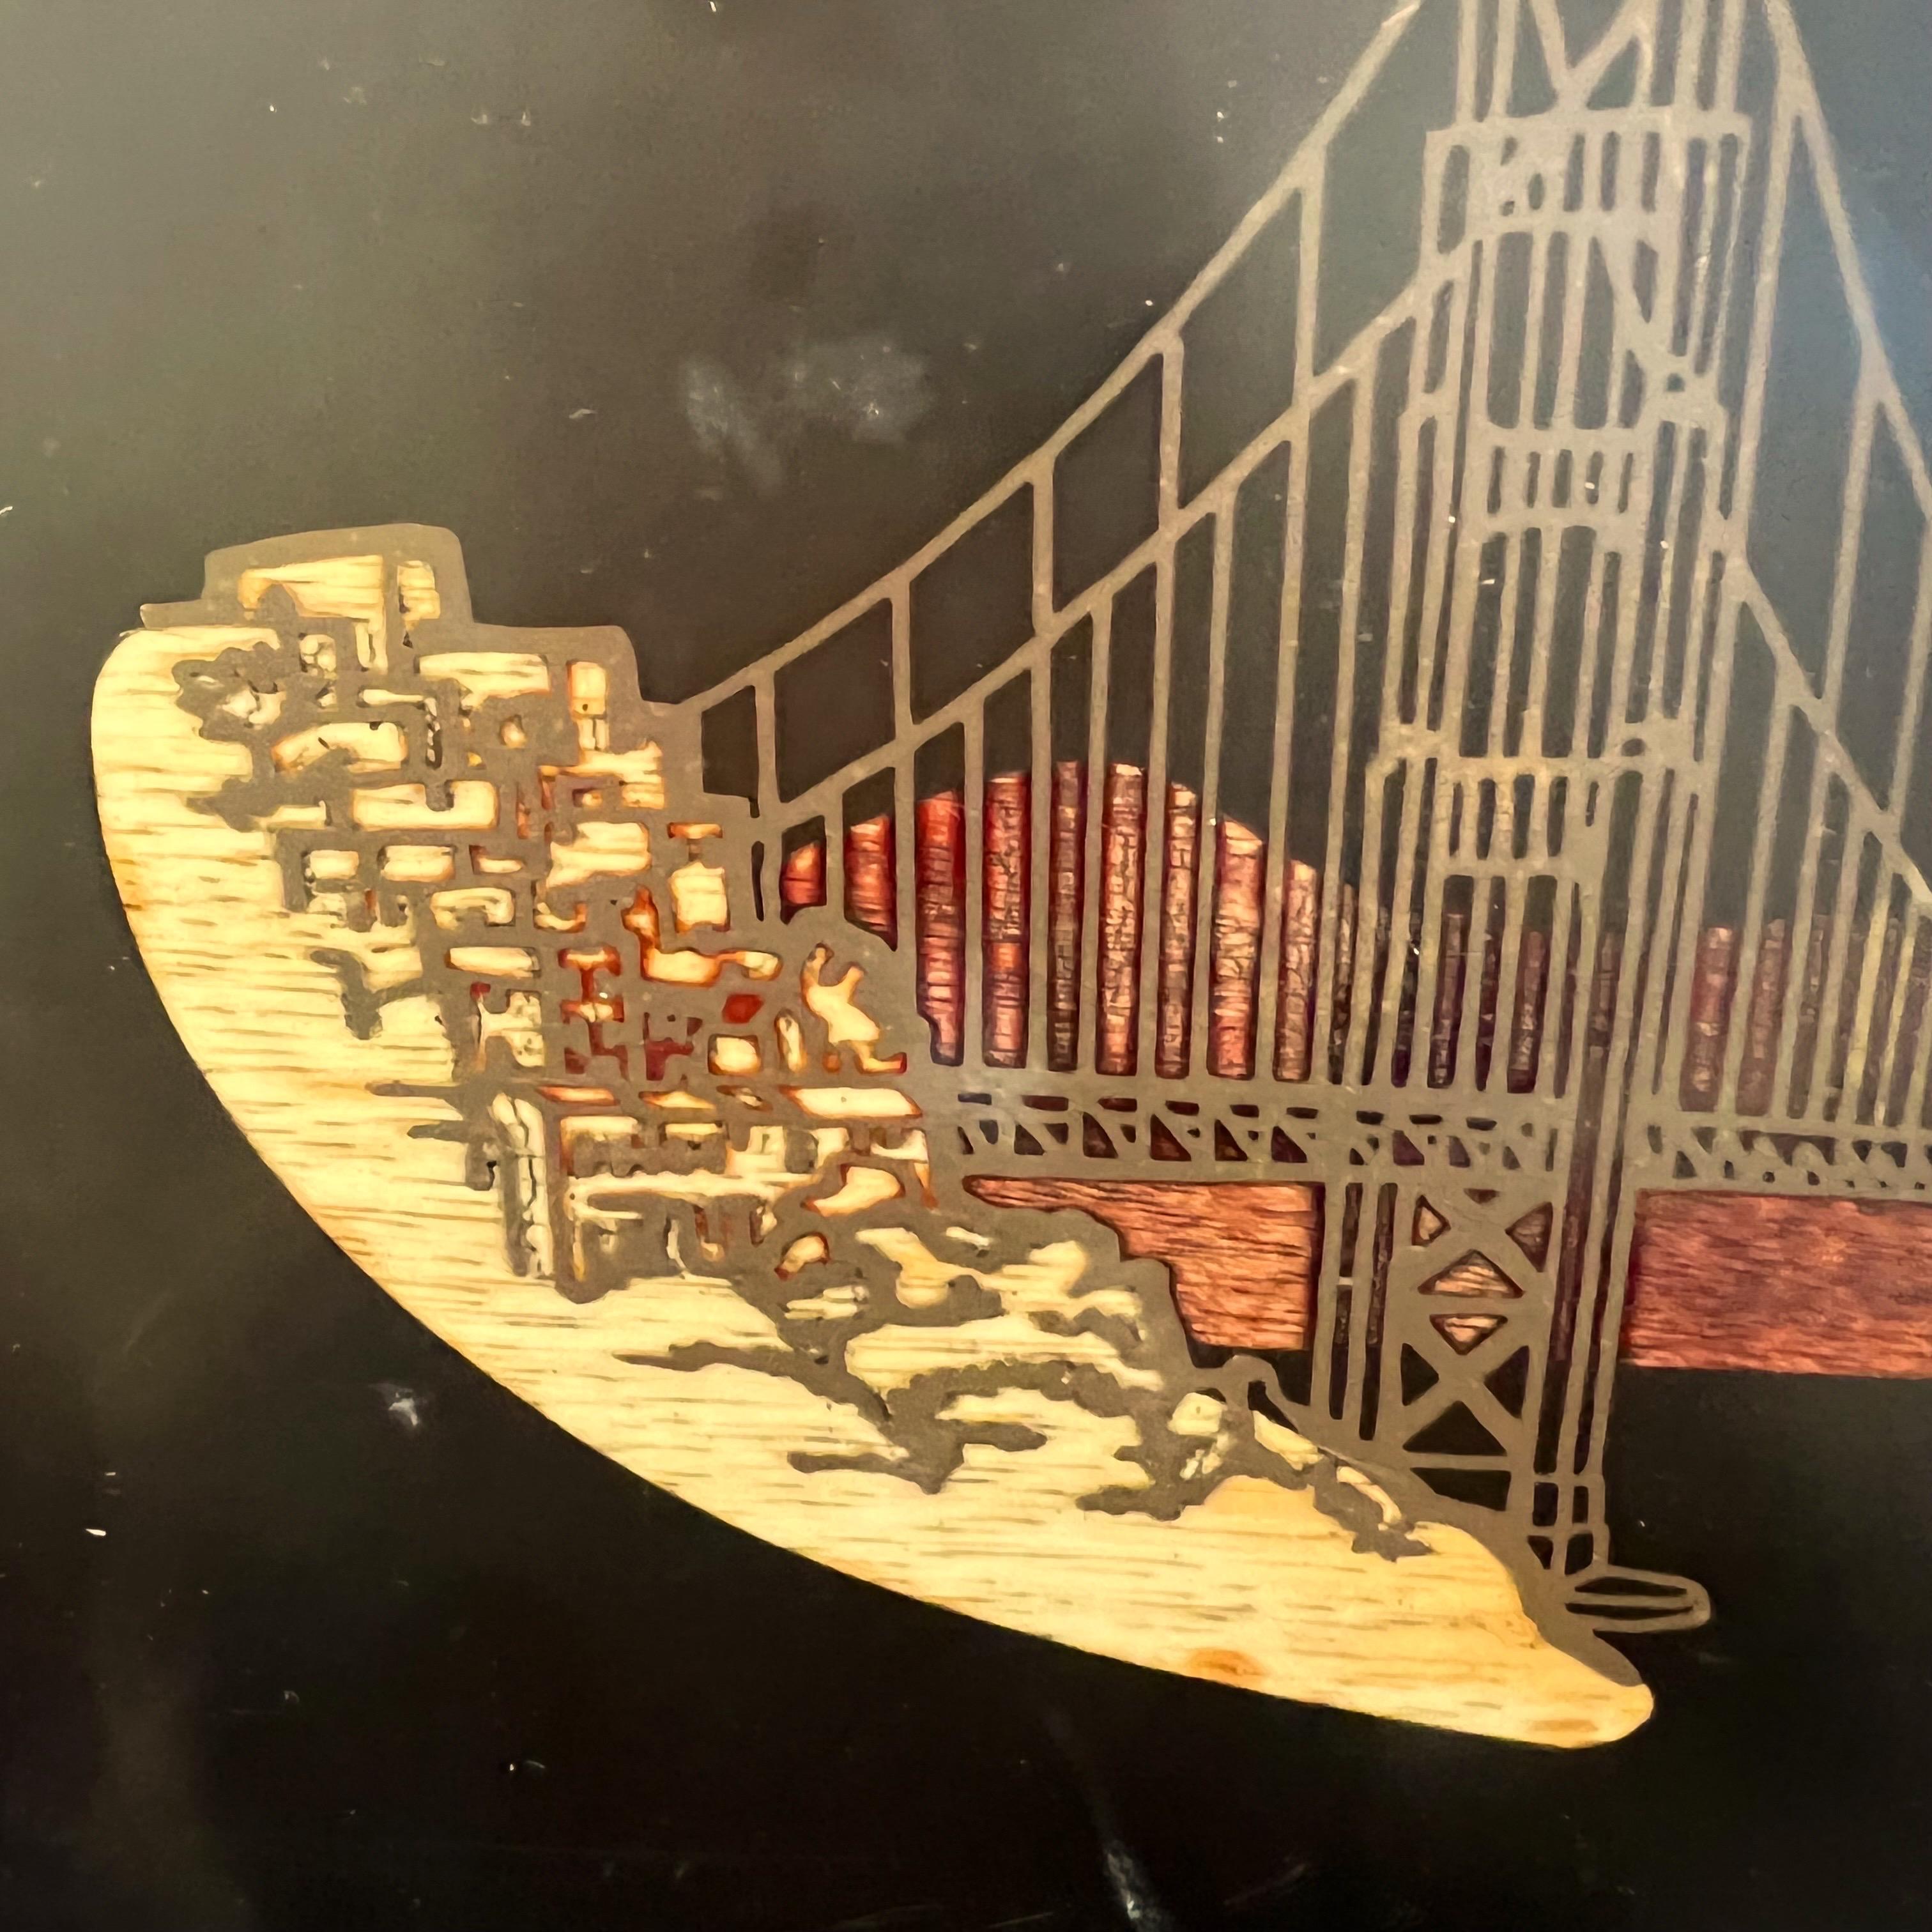 Vintage Couroc San Francisco Golden Gate Bridge tray. This black tray is 12.5” by 9.5” in size. It is inlaid with brass and wood, and has a subtle curved edge and 4 little feet on the bottom. It has its original sticker on the back. Excellent